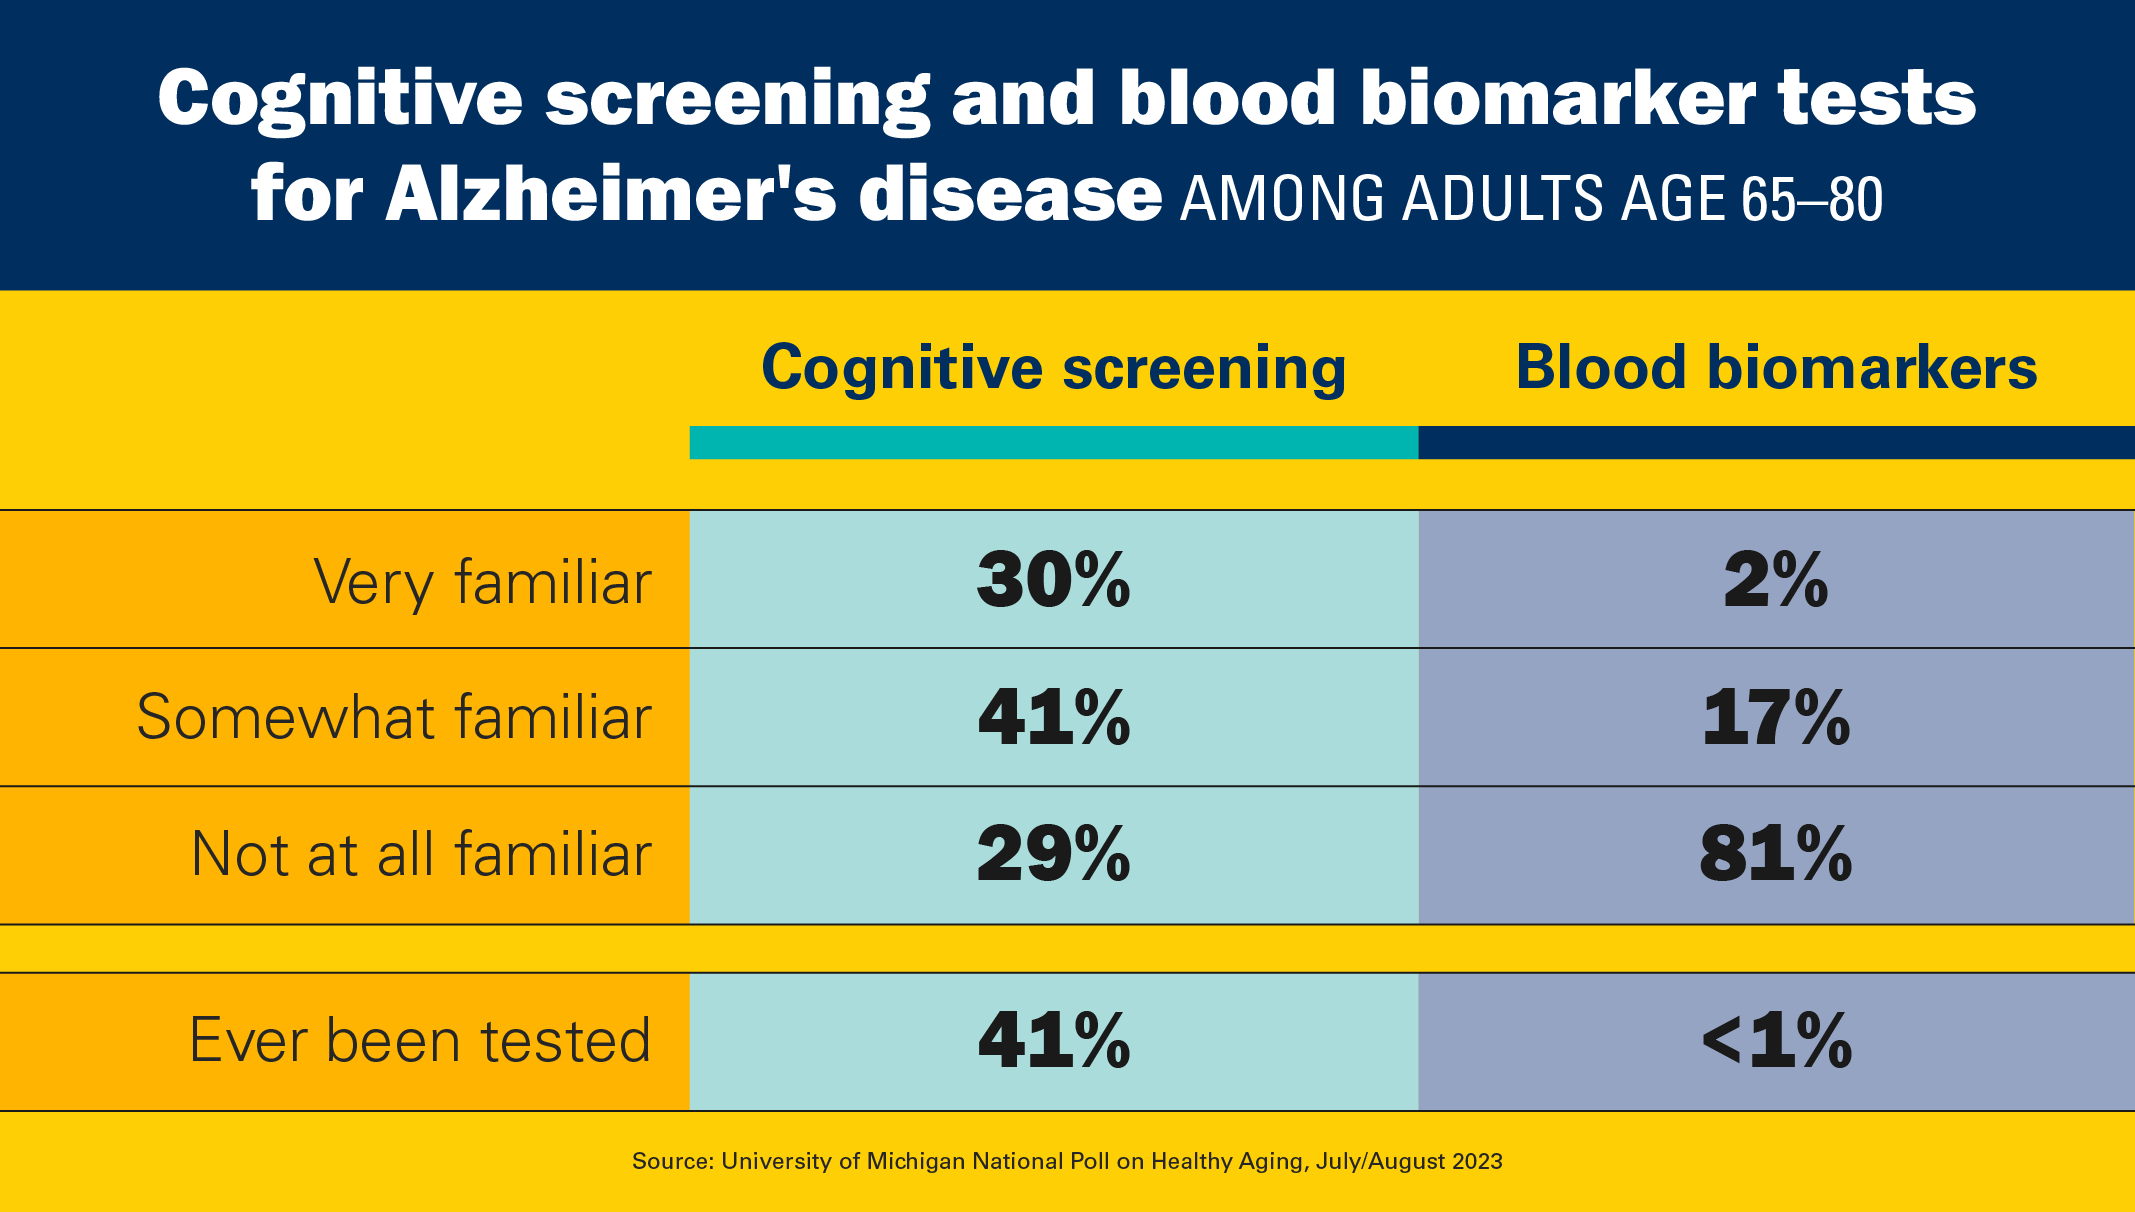 Cognitive screening and blood biomarker tests for Alzheimer's disease among adults age 65-80